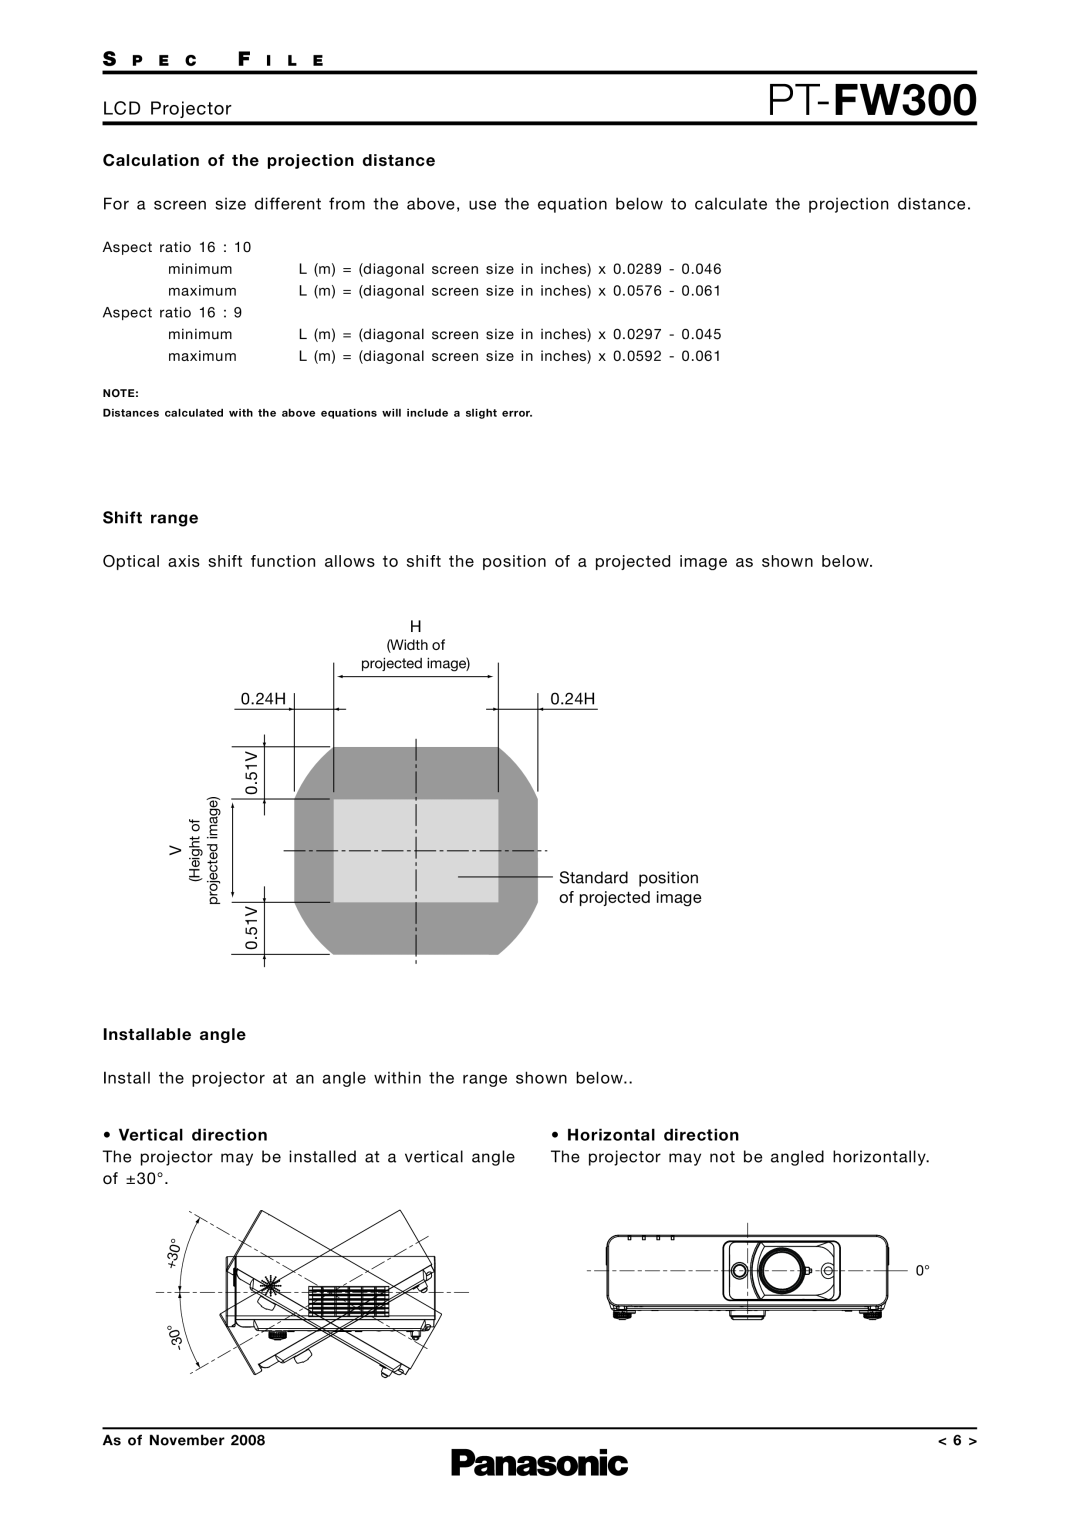 Panasonic PT-FW300 Calculation of the projection distance, Shift range, Installable angle, Vertical direction 